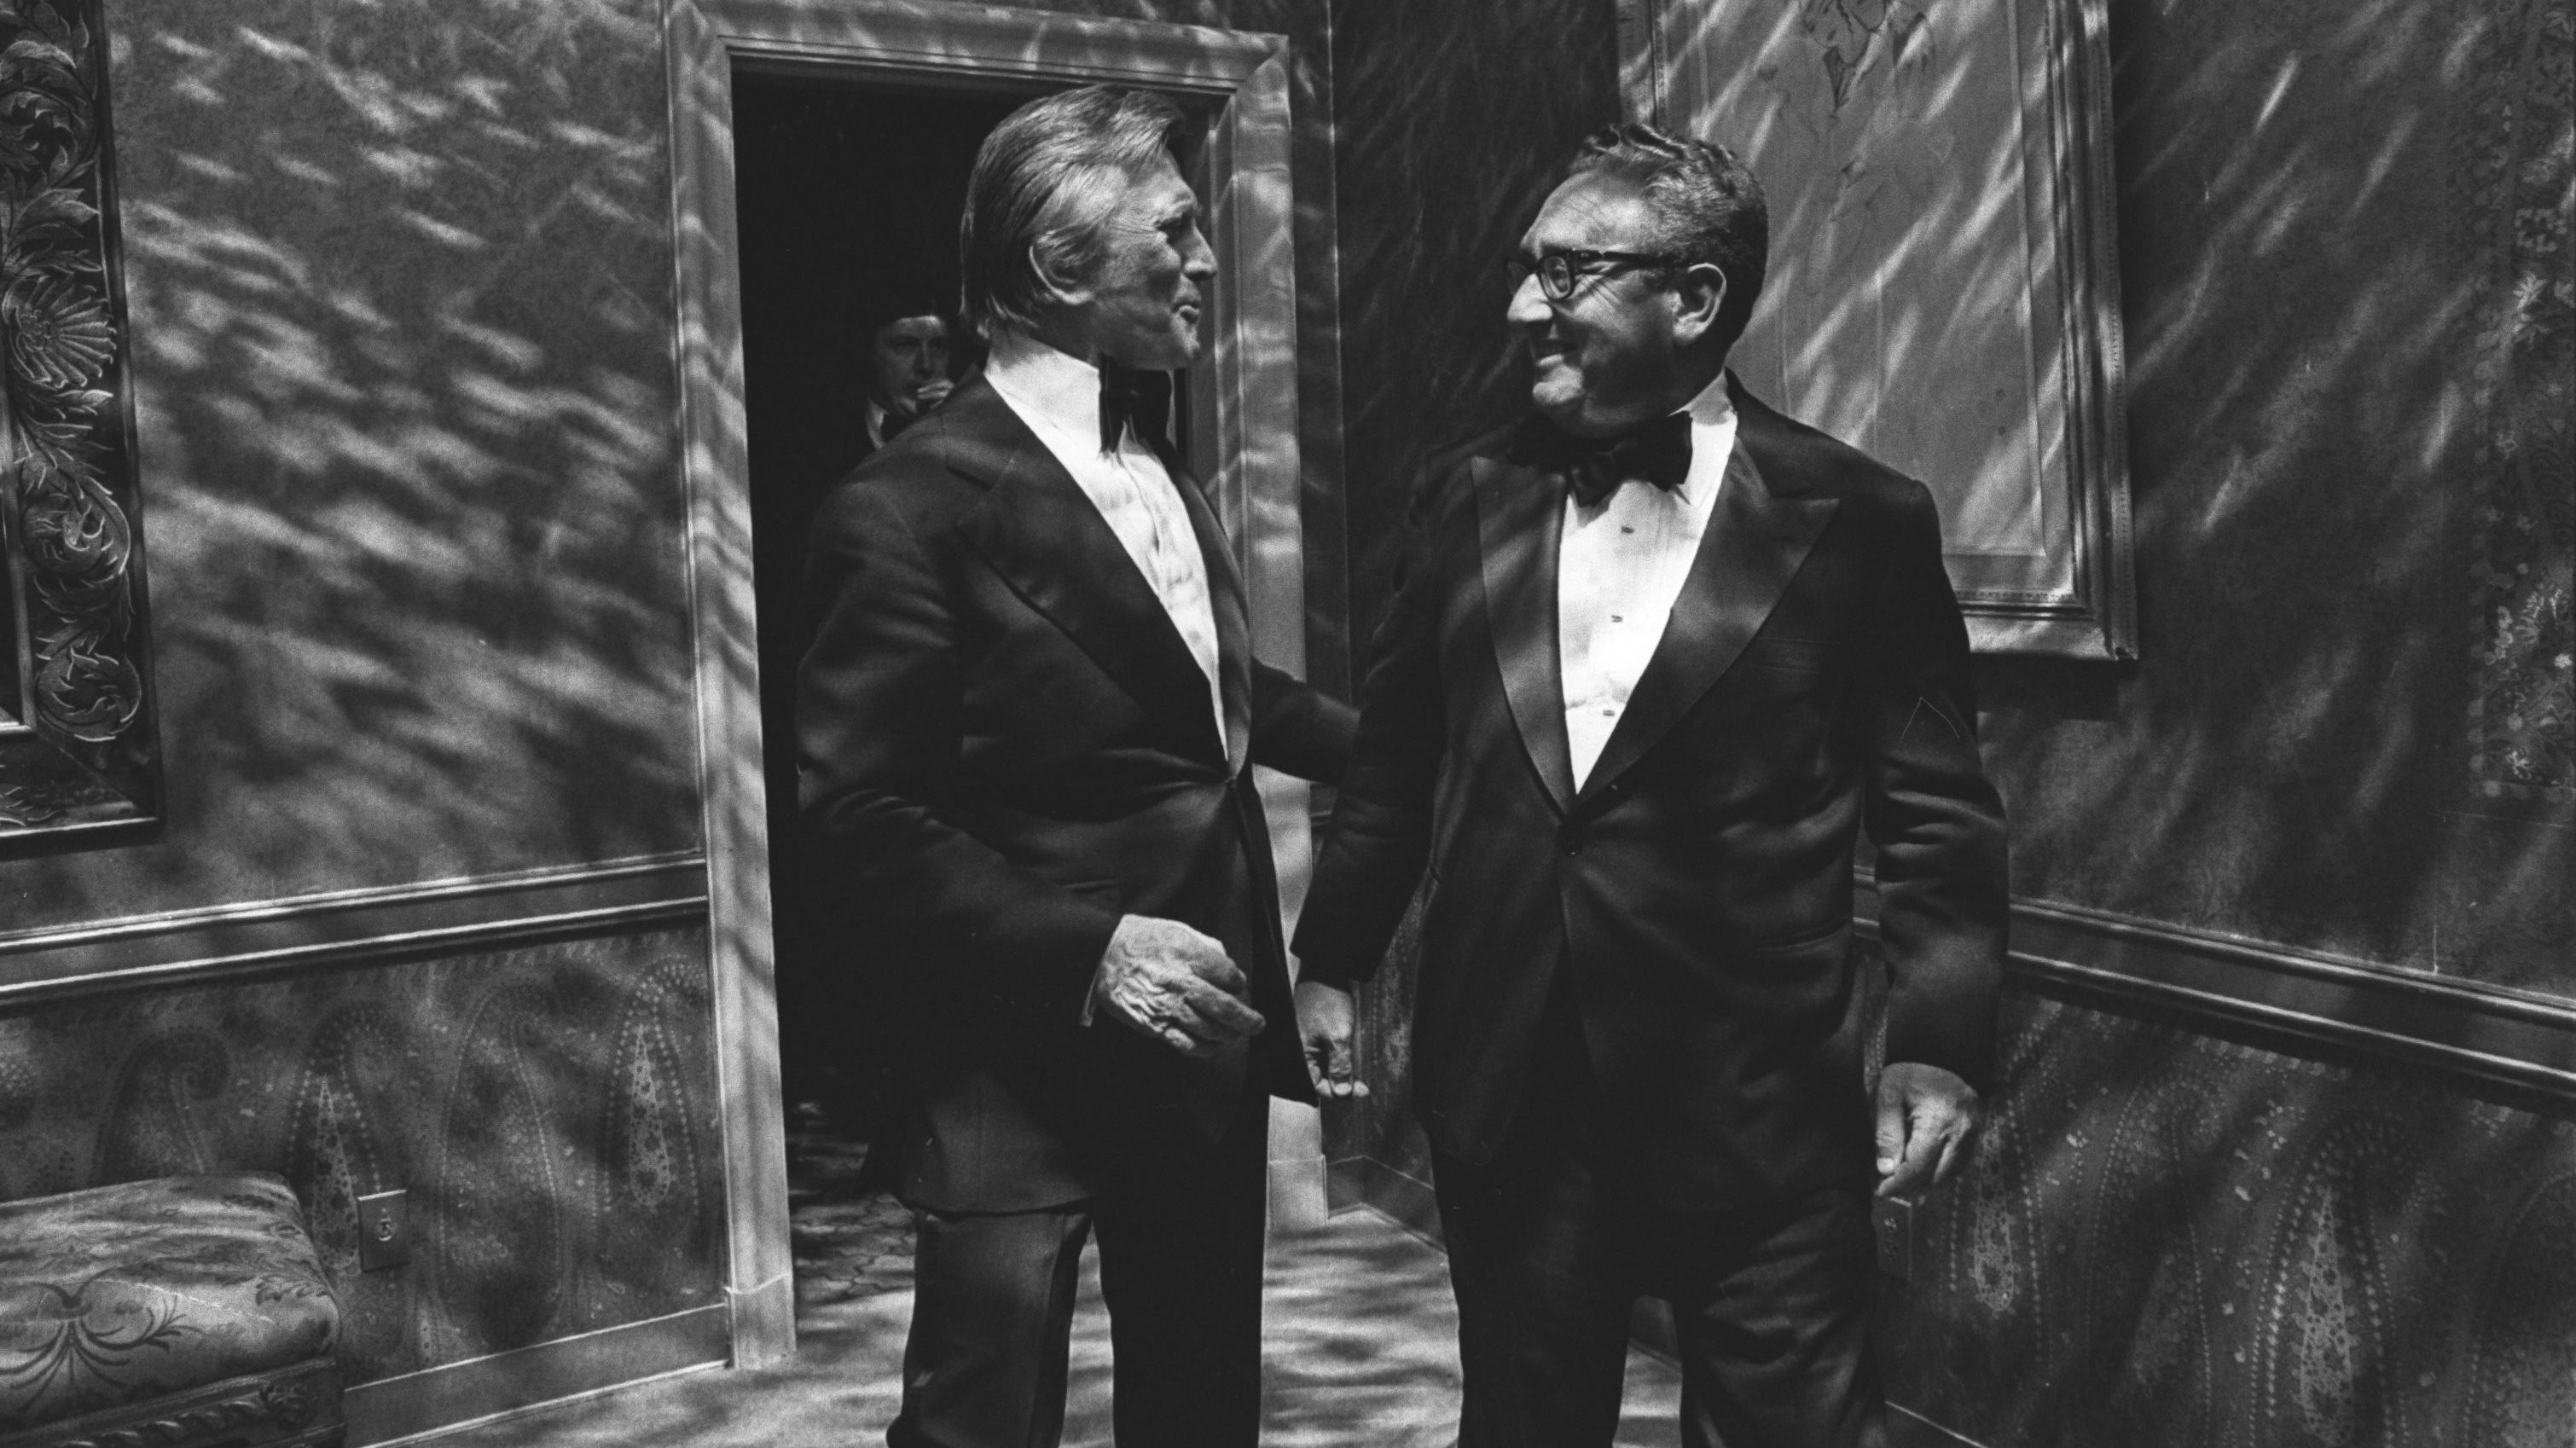 Kissinger talks with actor Kirk Douglas at a dinner party in 1977.